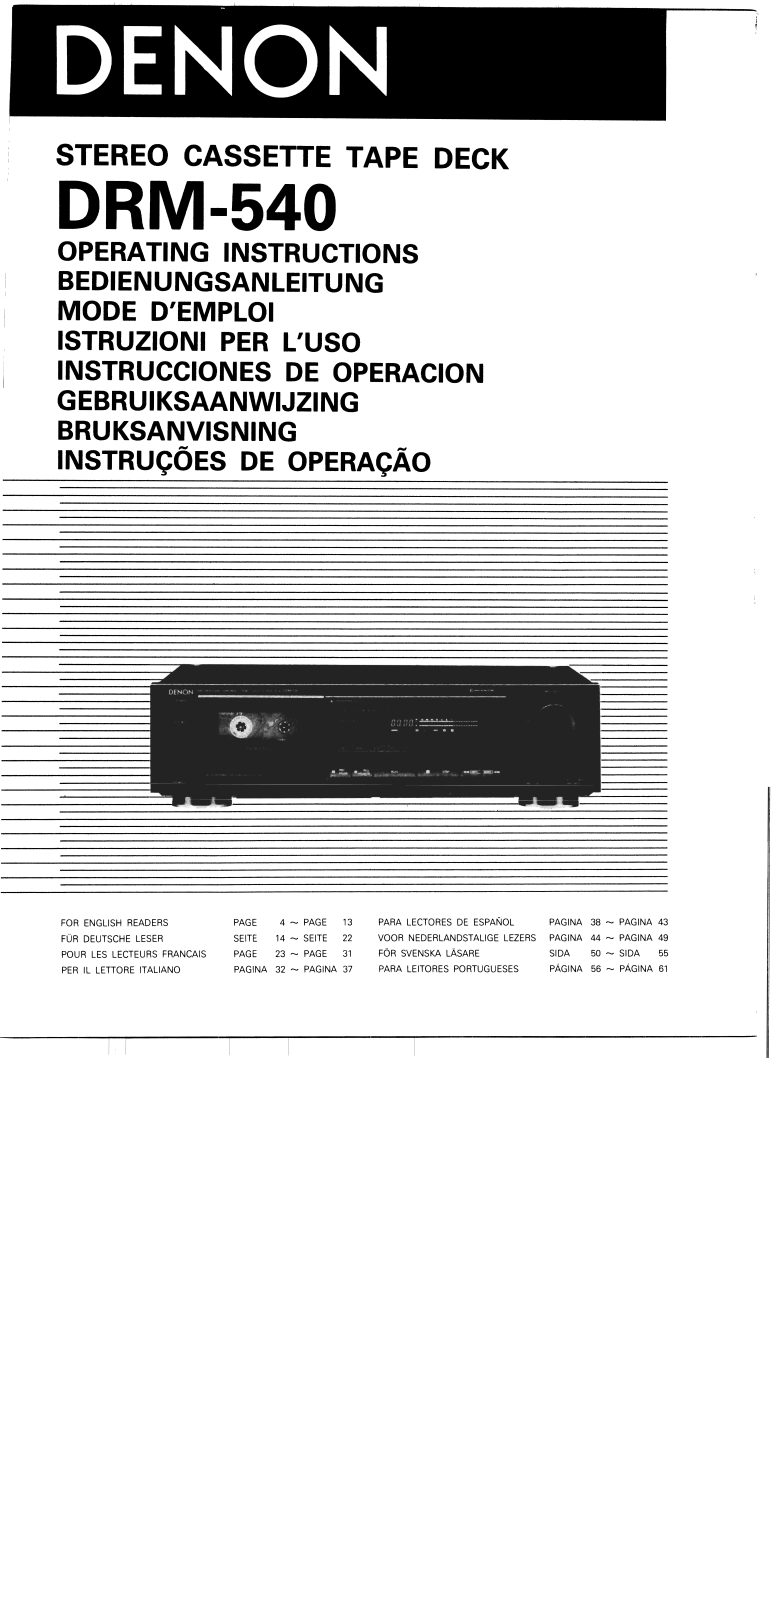 Denon DRM-540 Owner's Manual